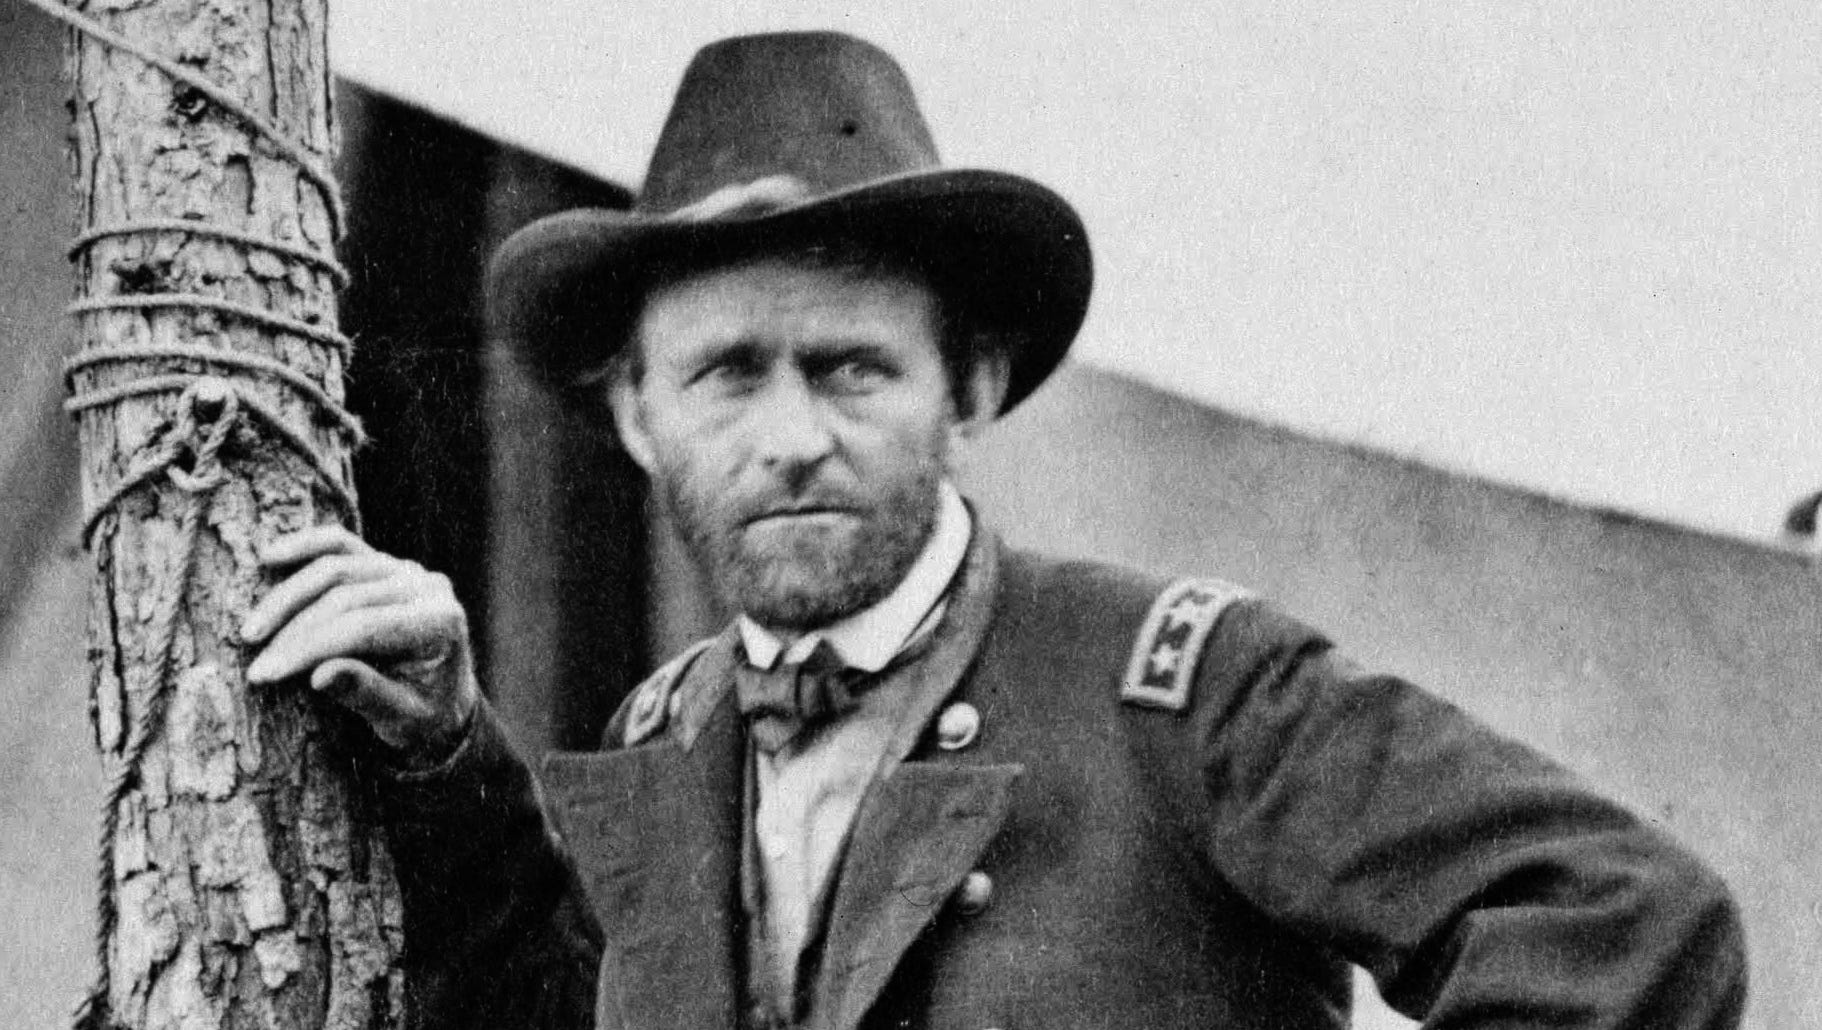 Ulysses Grant's evolution and atonement has lessons for modern America.